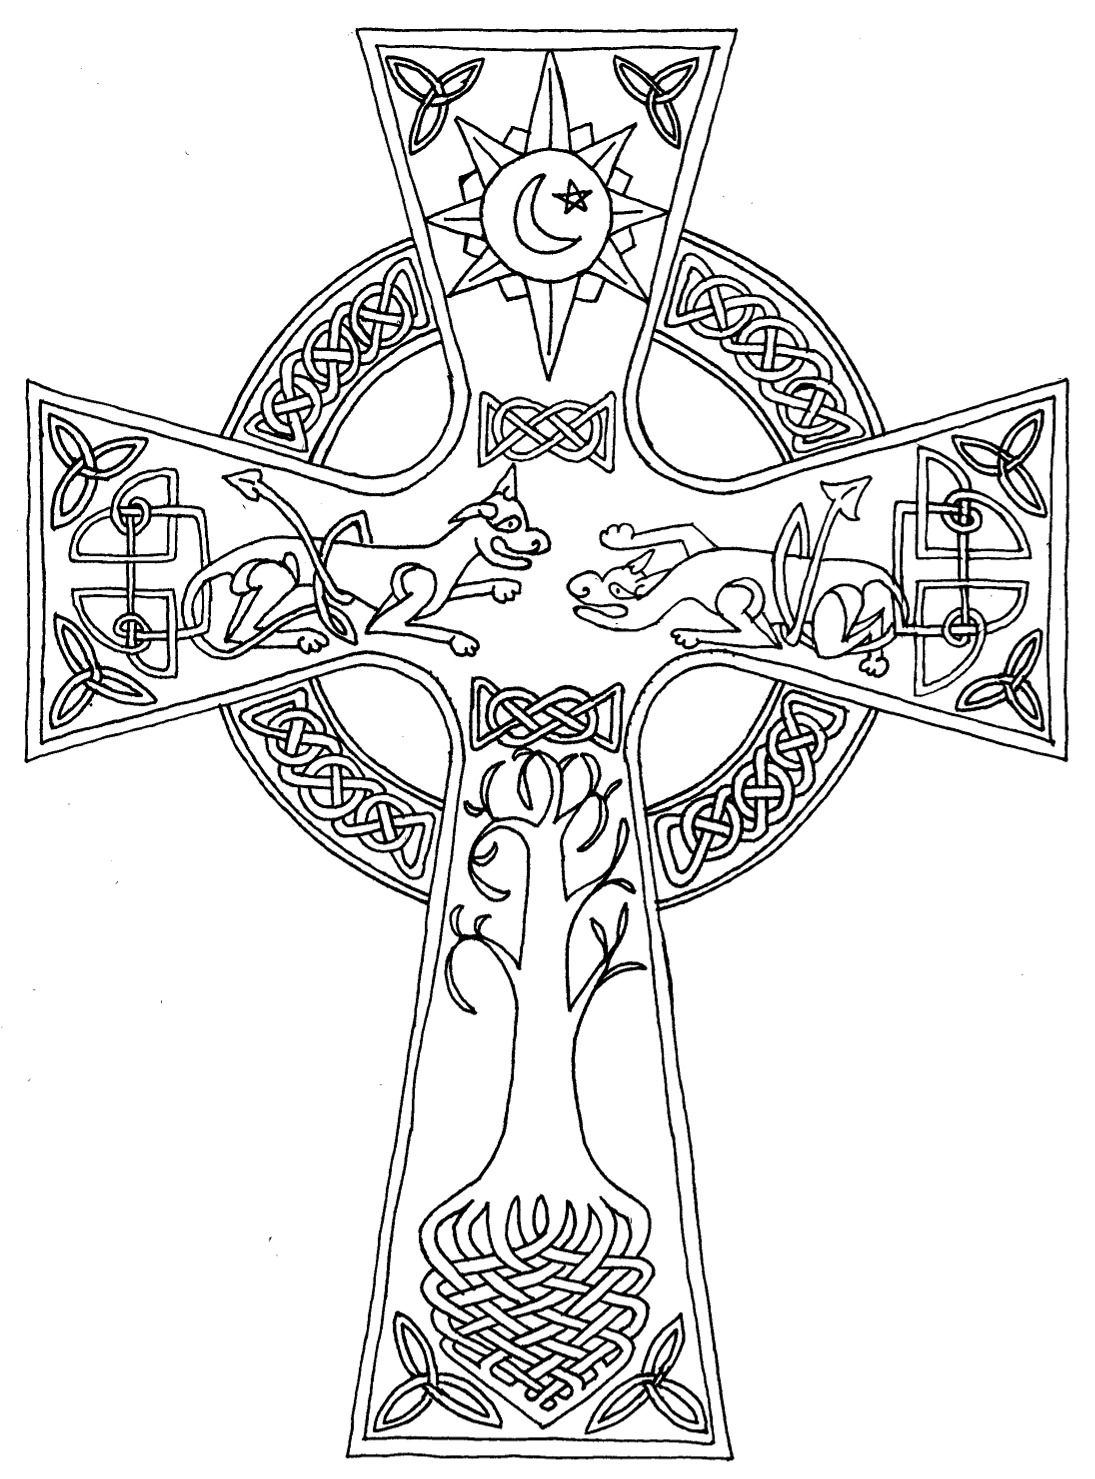 celtic-cross-coloring-pages-16.jpg